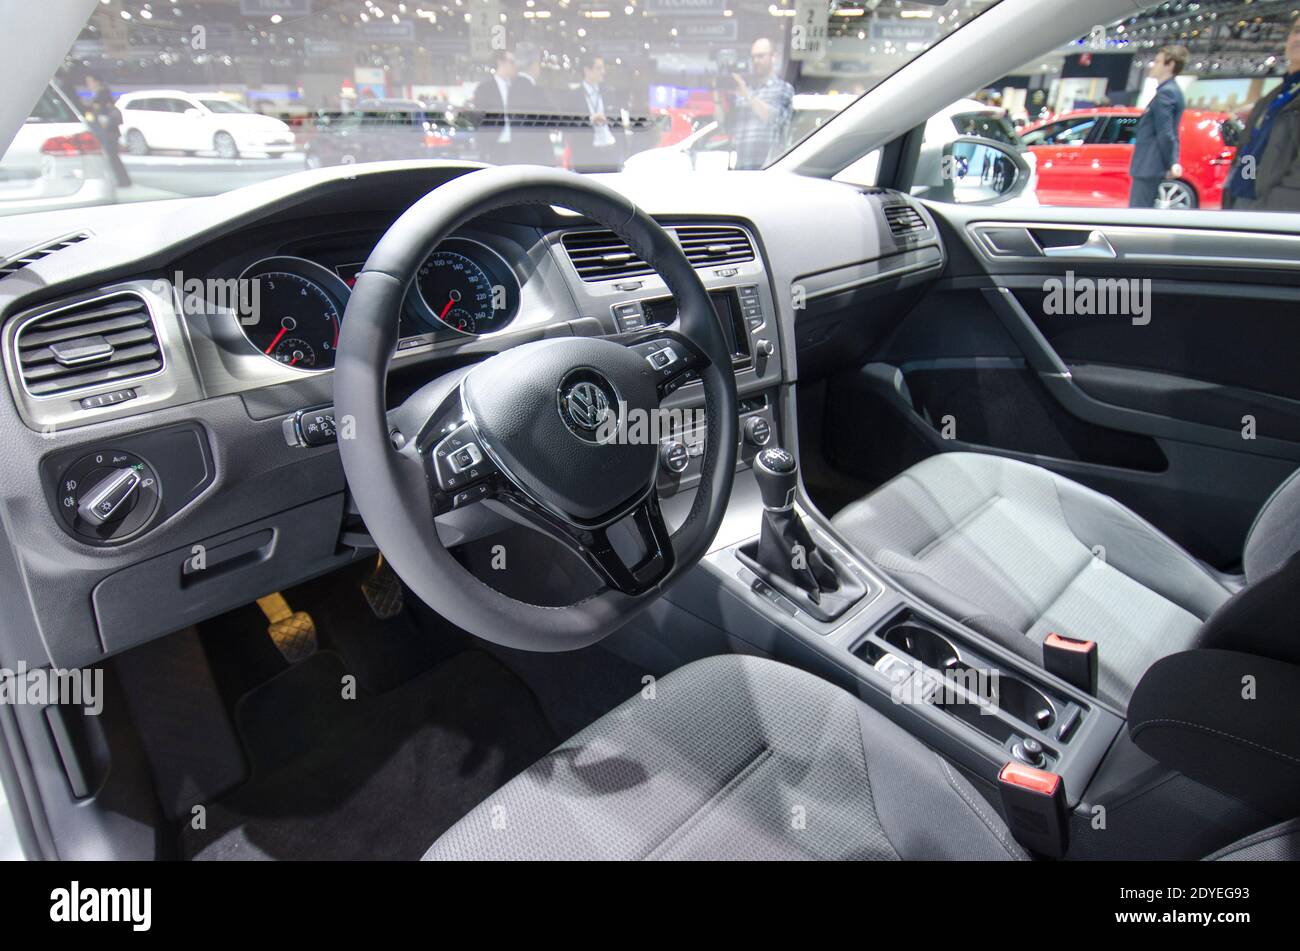 Interior view of the Volkswagen Golf VII, car of the year 2012 and 2013,  pictured during